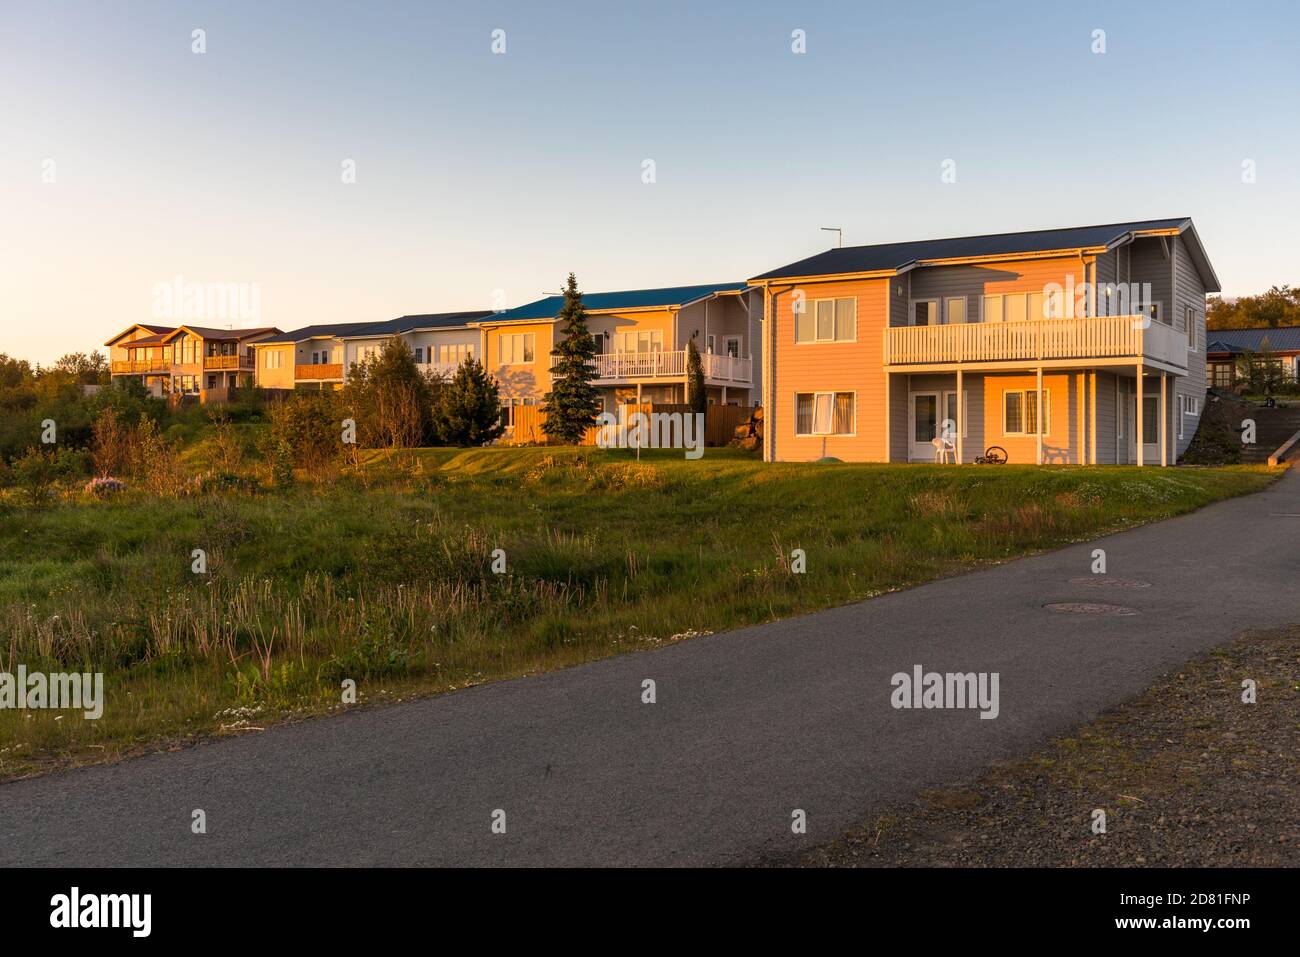 New detached houses in a housing development at sunset Stock Photo